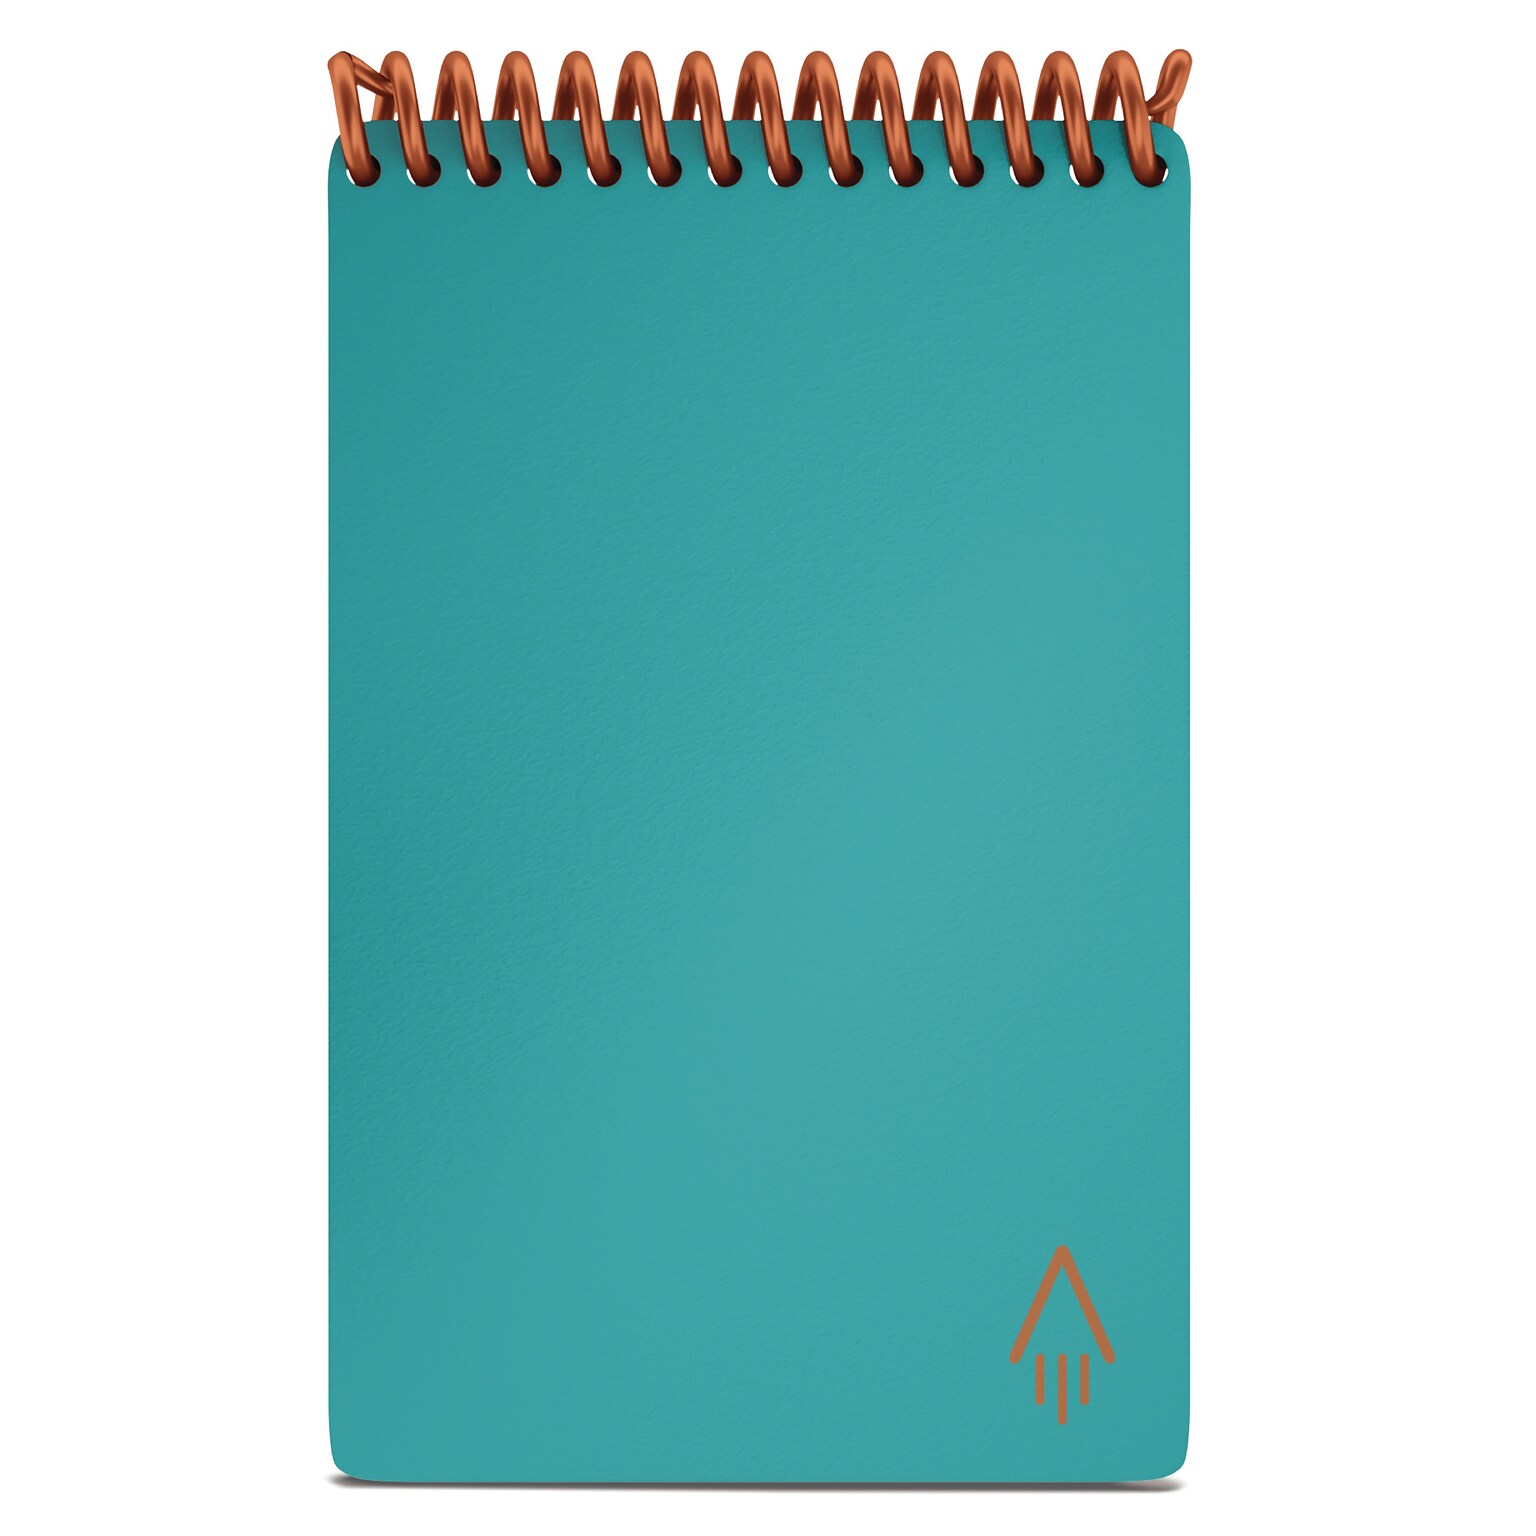 Rocketbook Mini Reusable Smart Notepad, 3.5 x 5.5, Dot-Grid Ruled, Teal, 48 Pages (EVR-M-RC-CCE-FR)